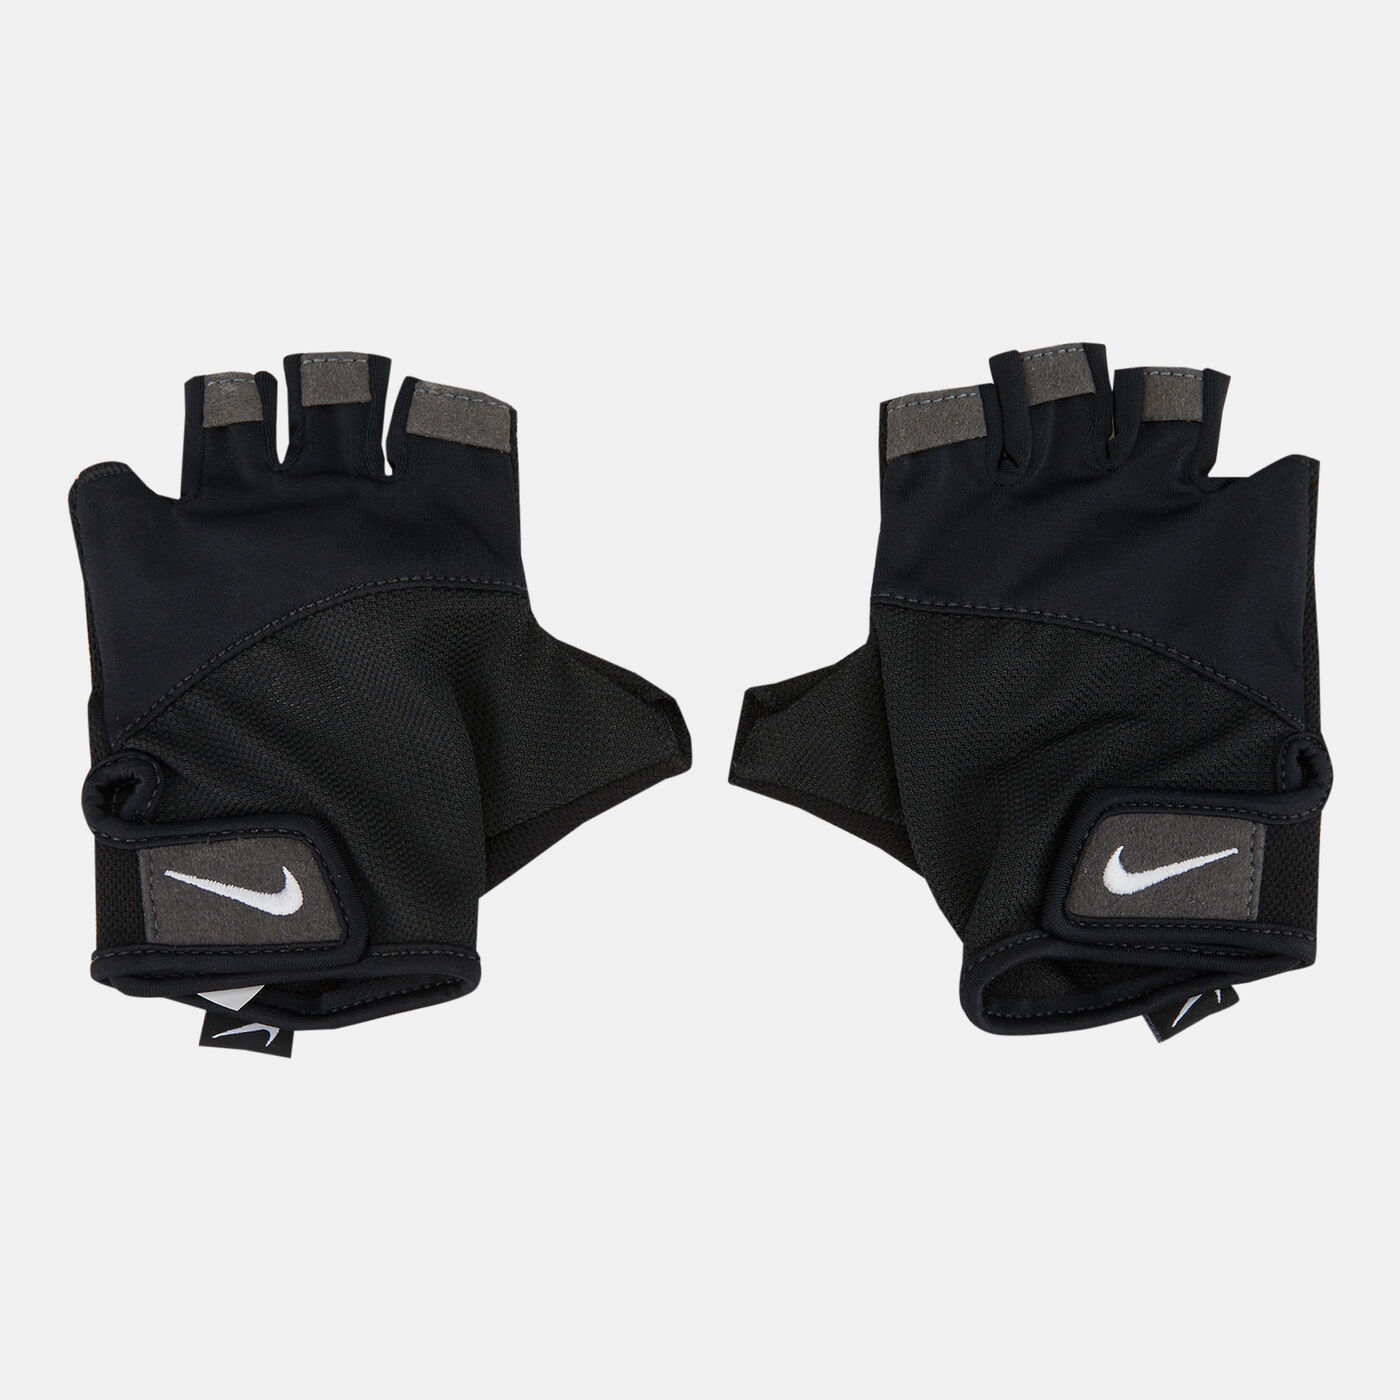 Women's Essential Fitness Gym Gloves - S